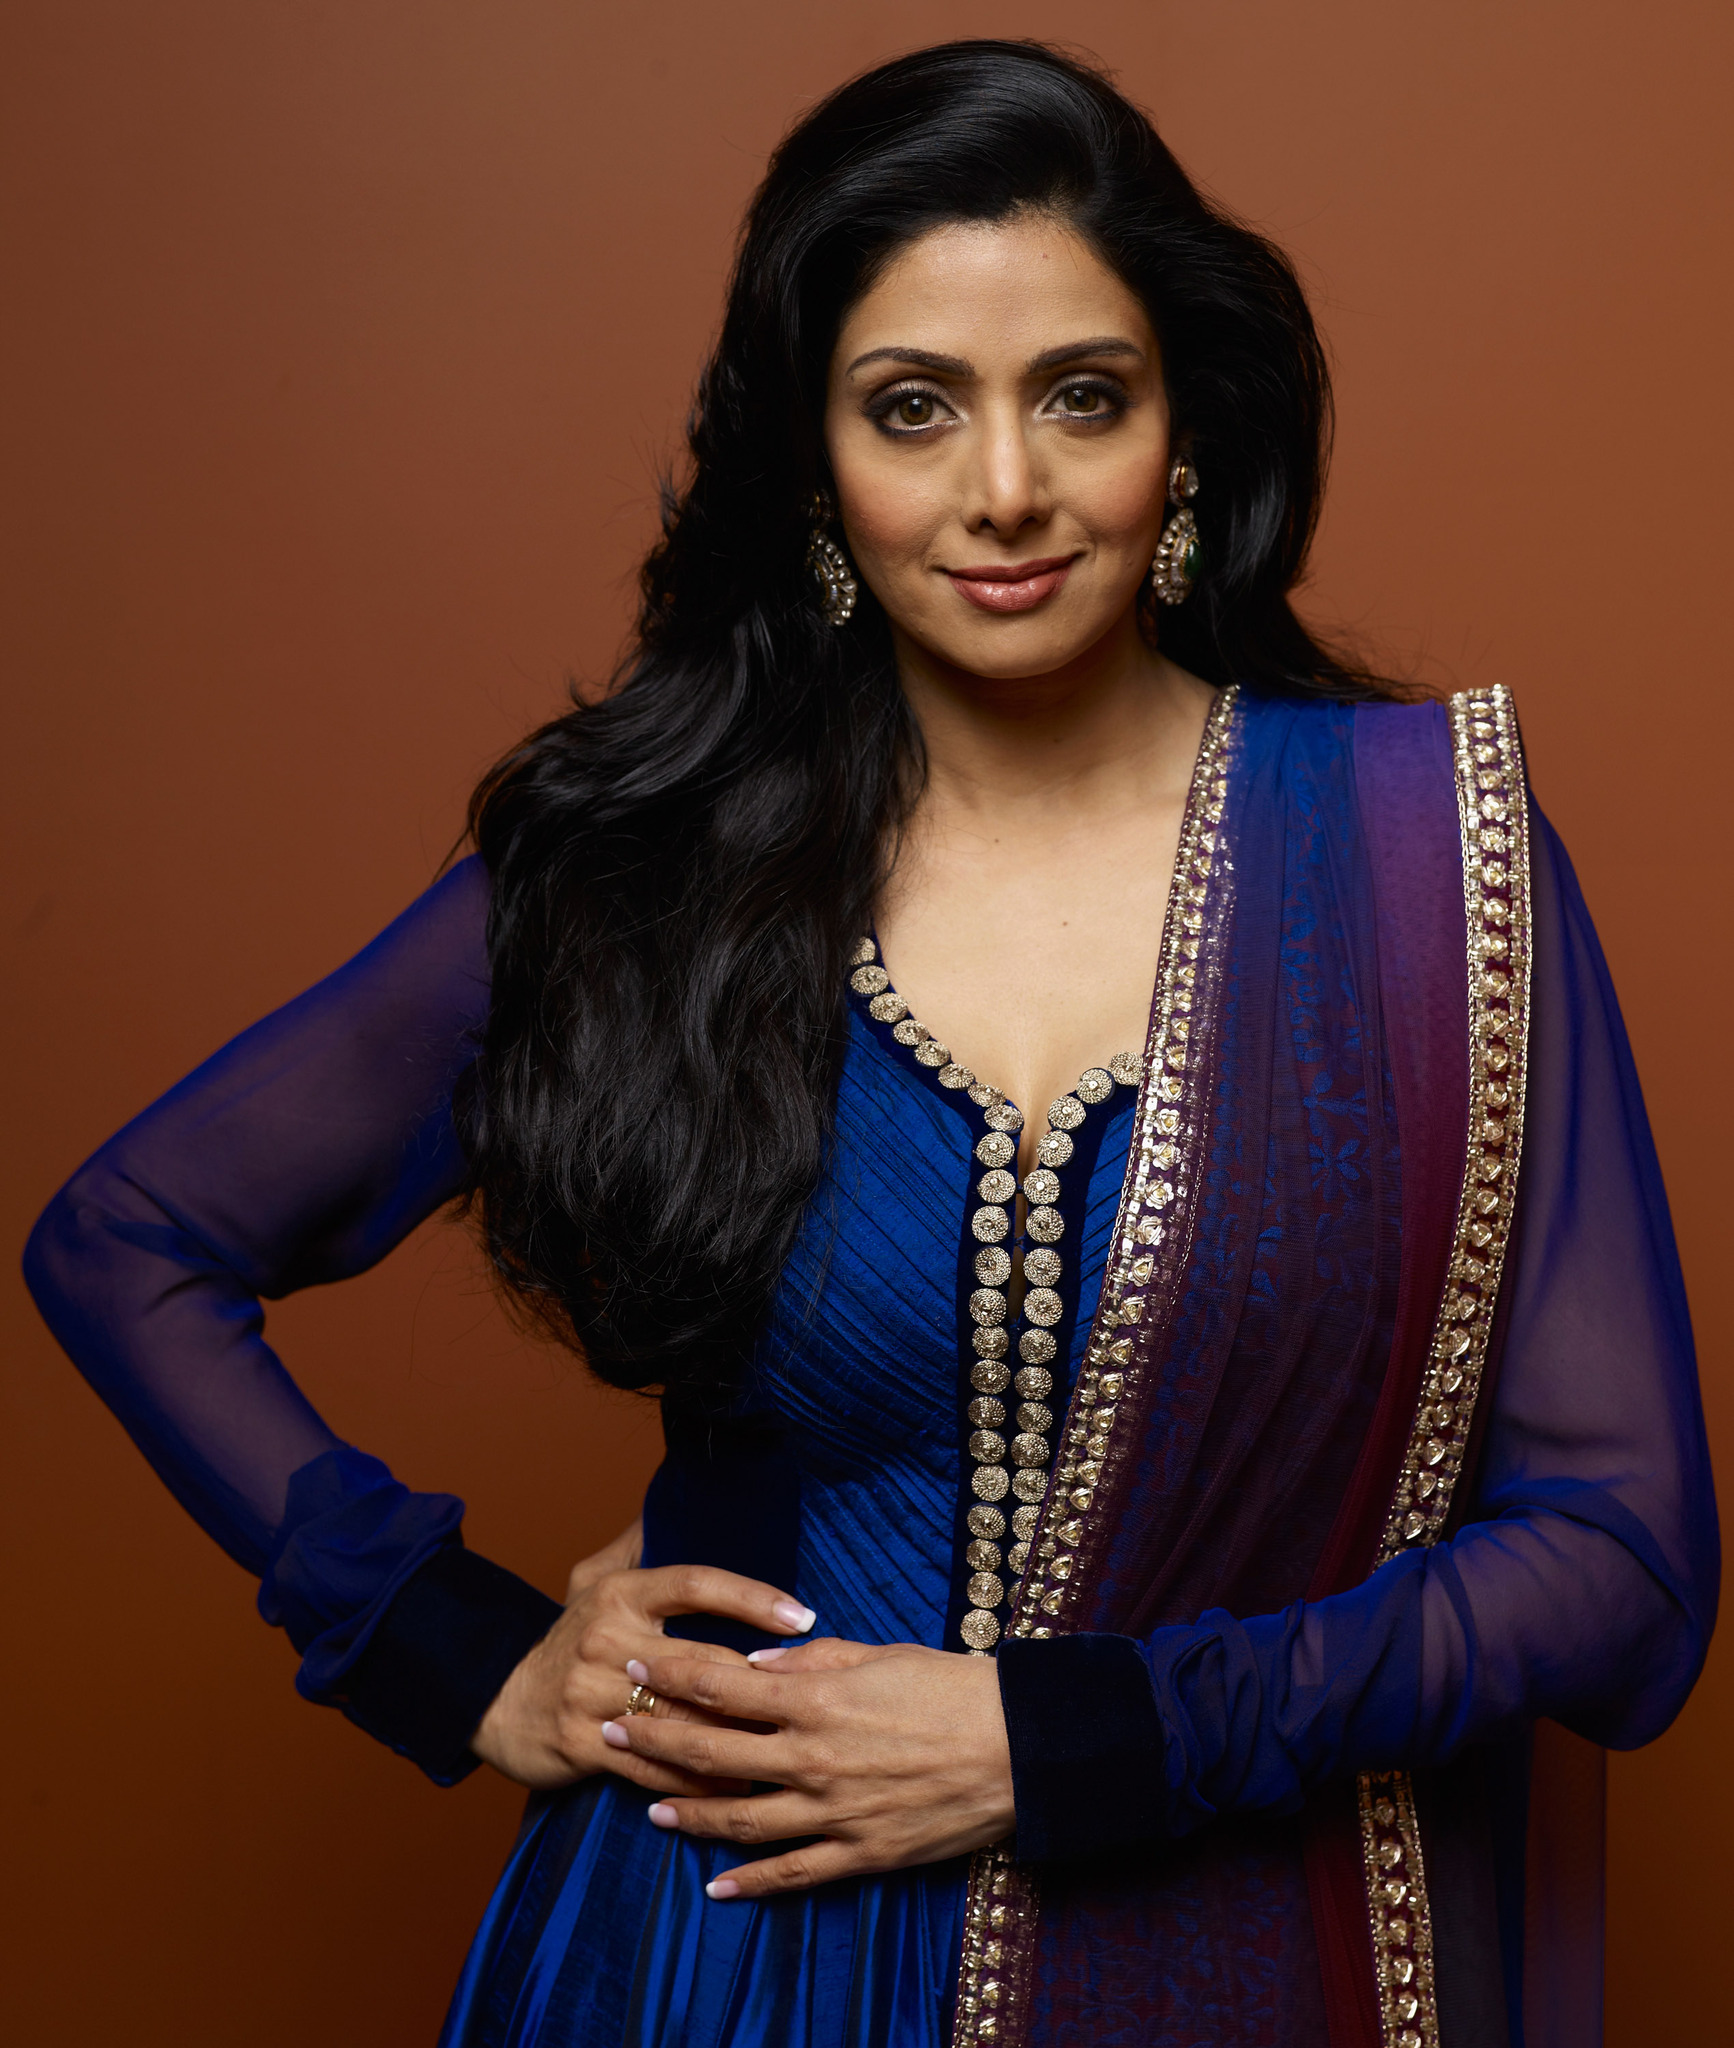 Why is Sridevi India’s first female megastar? Article by Dhiraj Kumar on late actress’ 58th birth anniversary